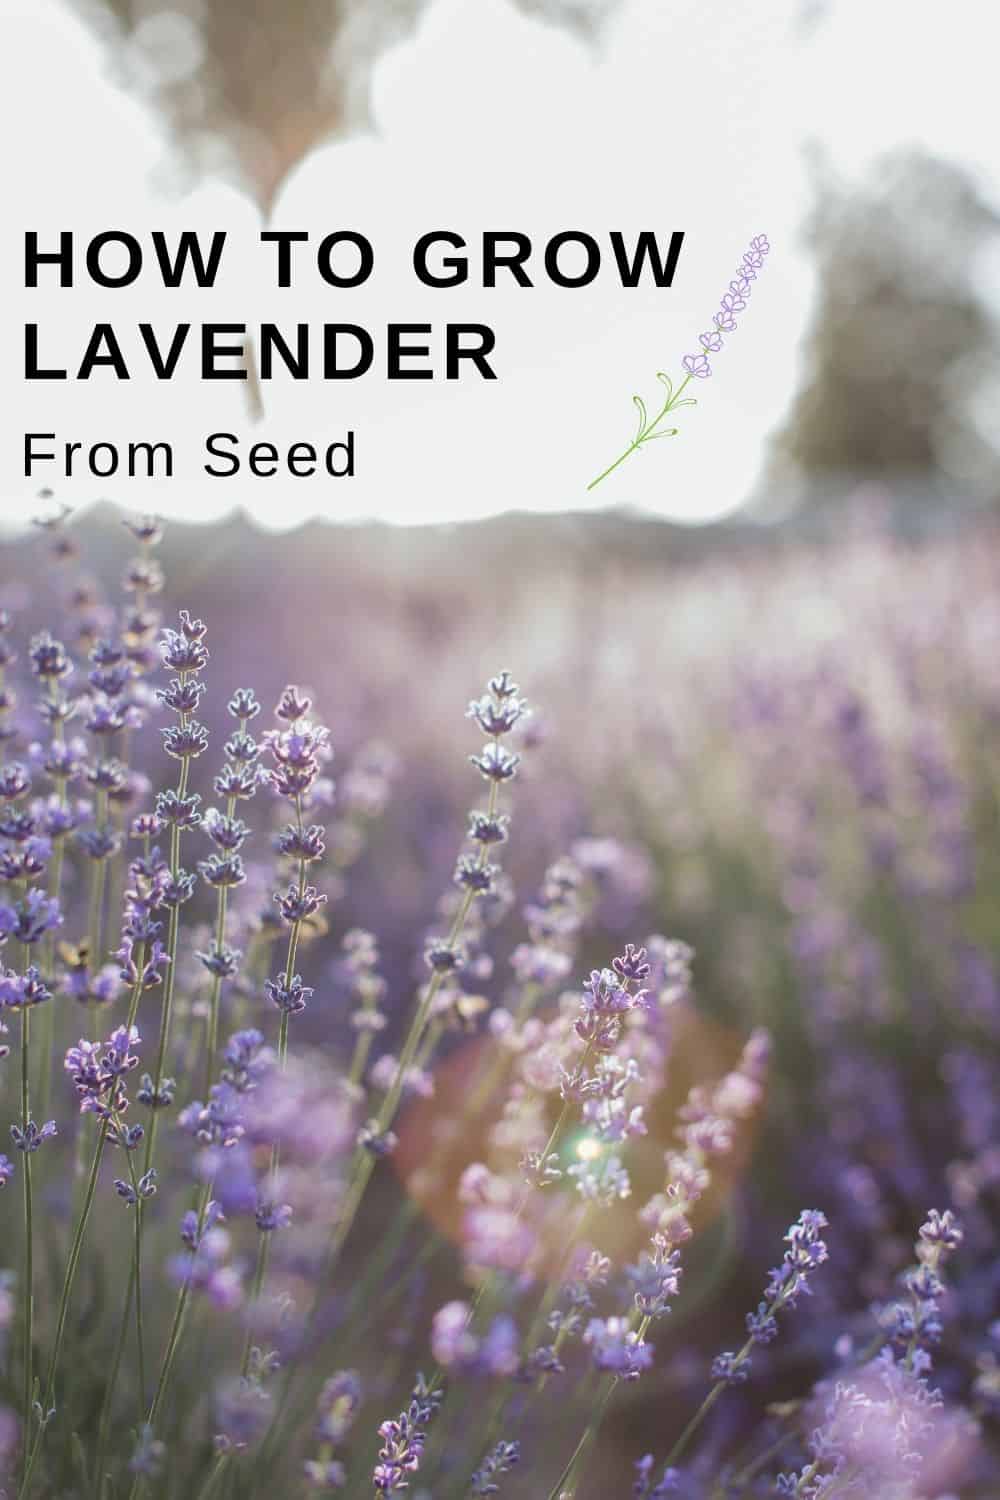 Lavender growing in a field with text overlay 'how to grow lavender from seed'